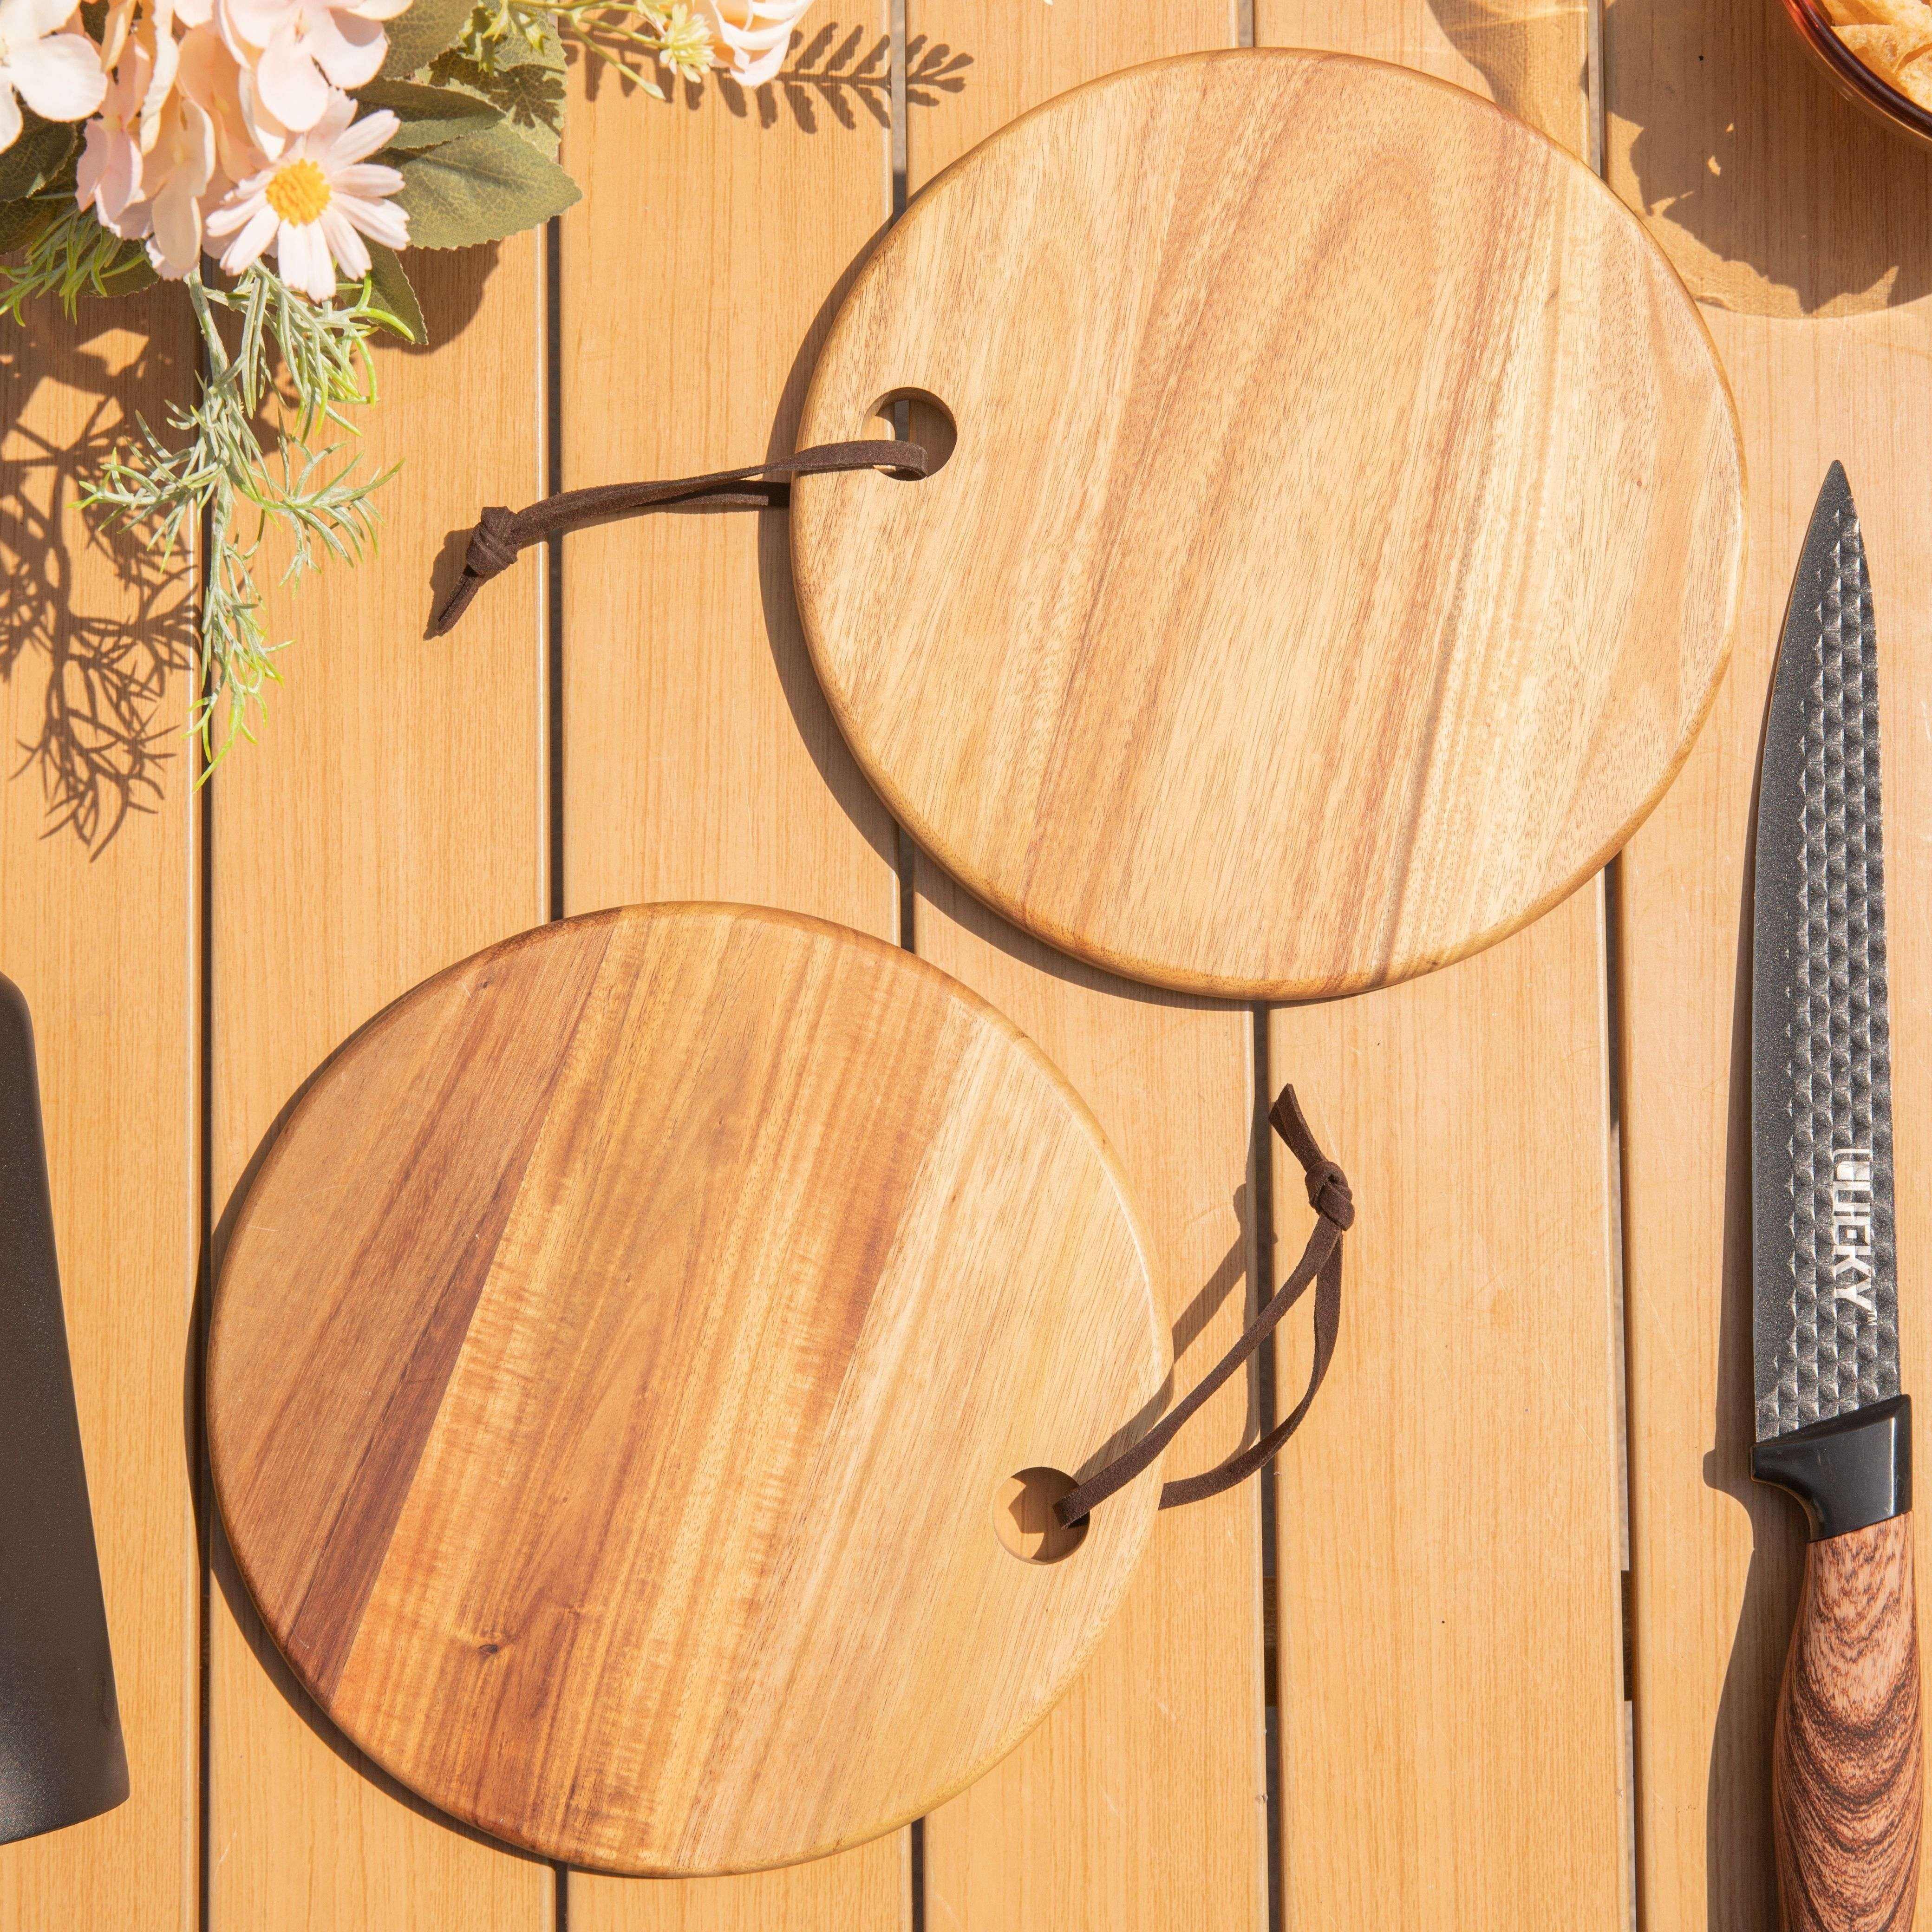 Reusable Wooden Cutting Board - Perfect For Home Kitchen & Outdoor